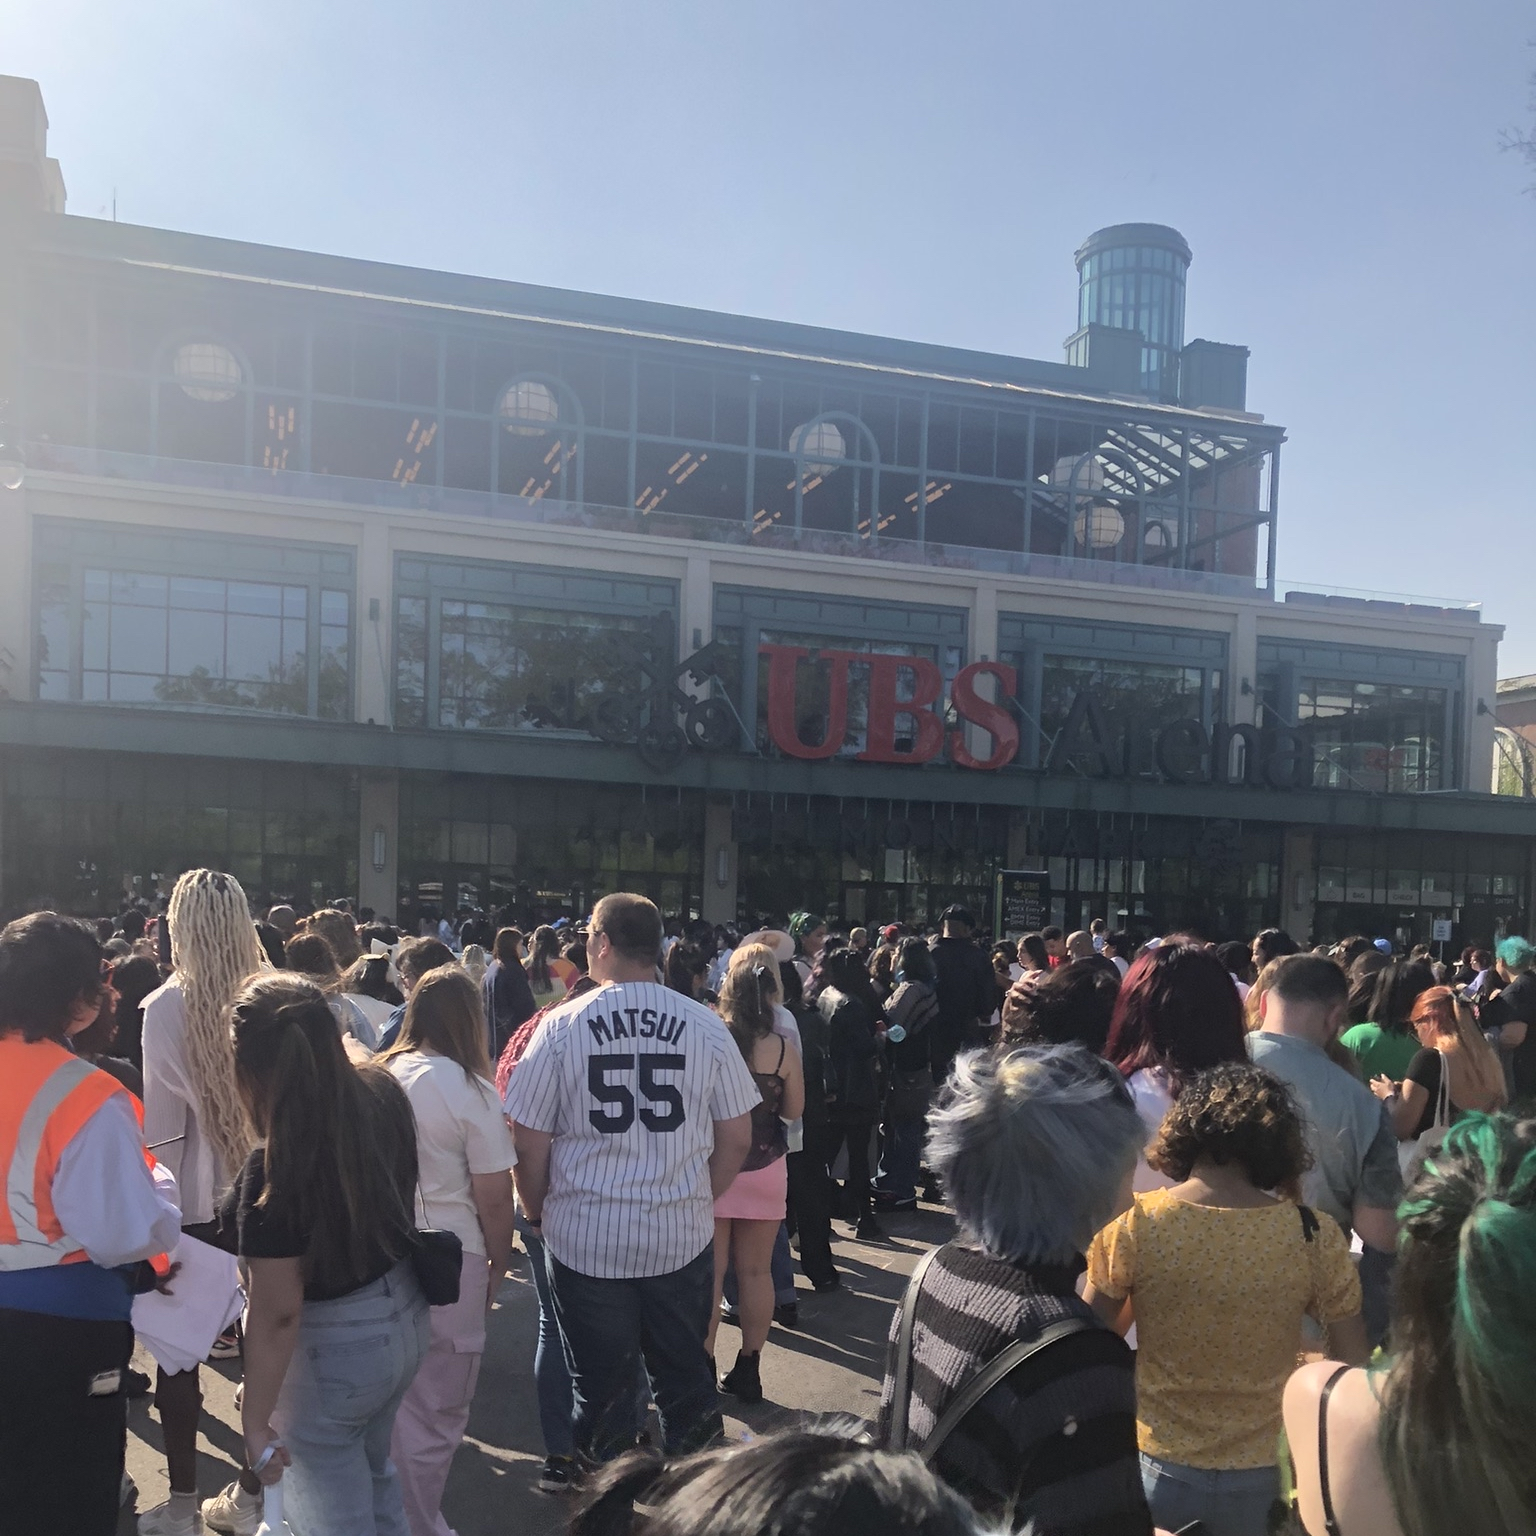 The crowd outside UBS Arena